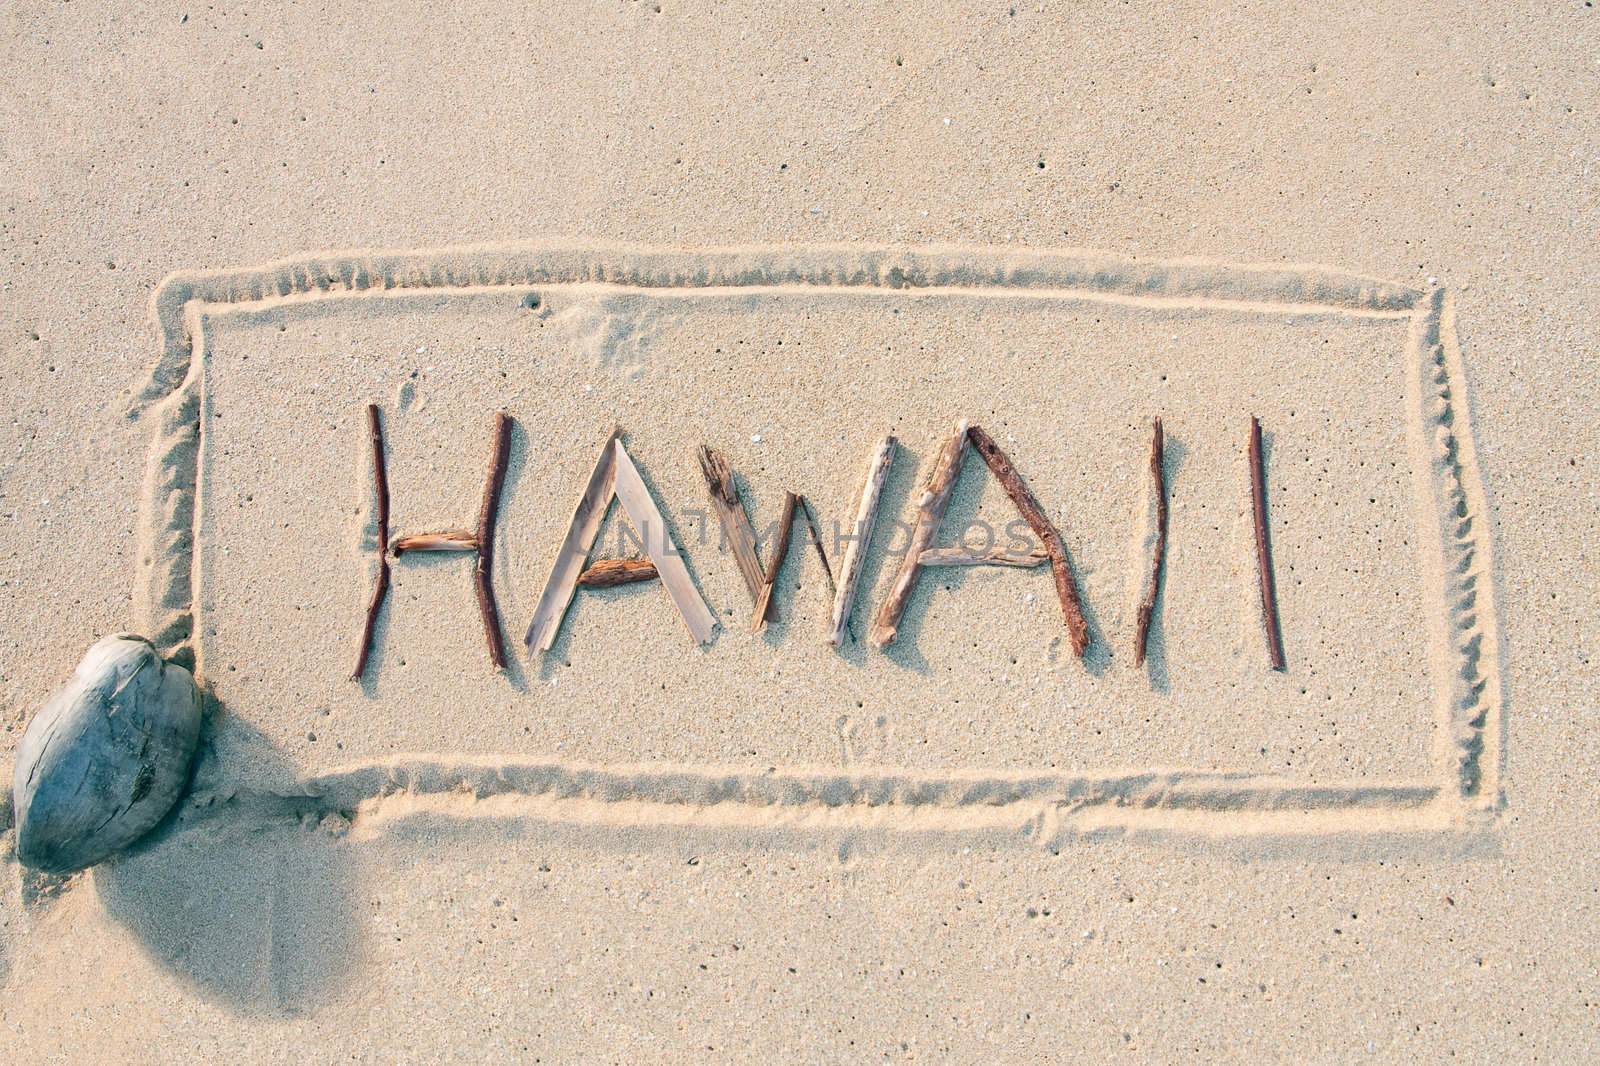 Hawaii written with sticks on a sandy beach with coconut